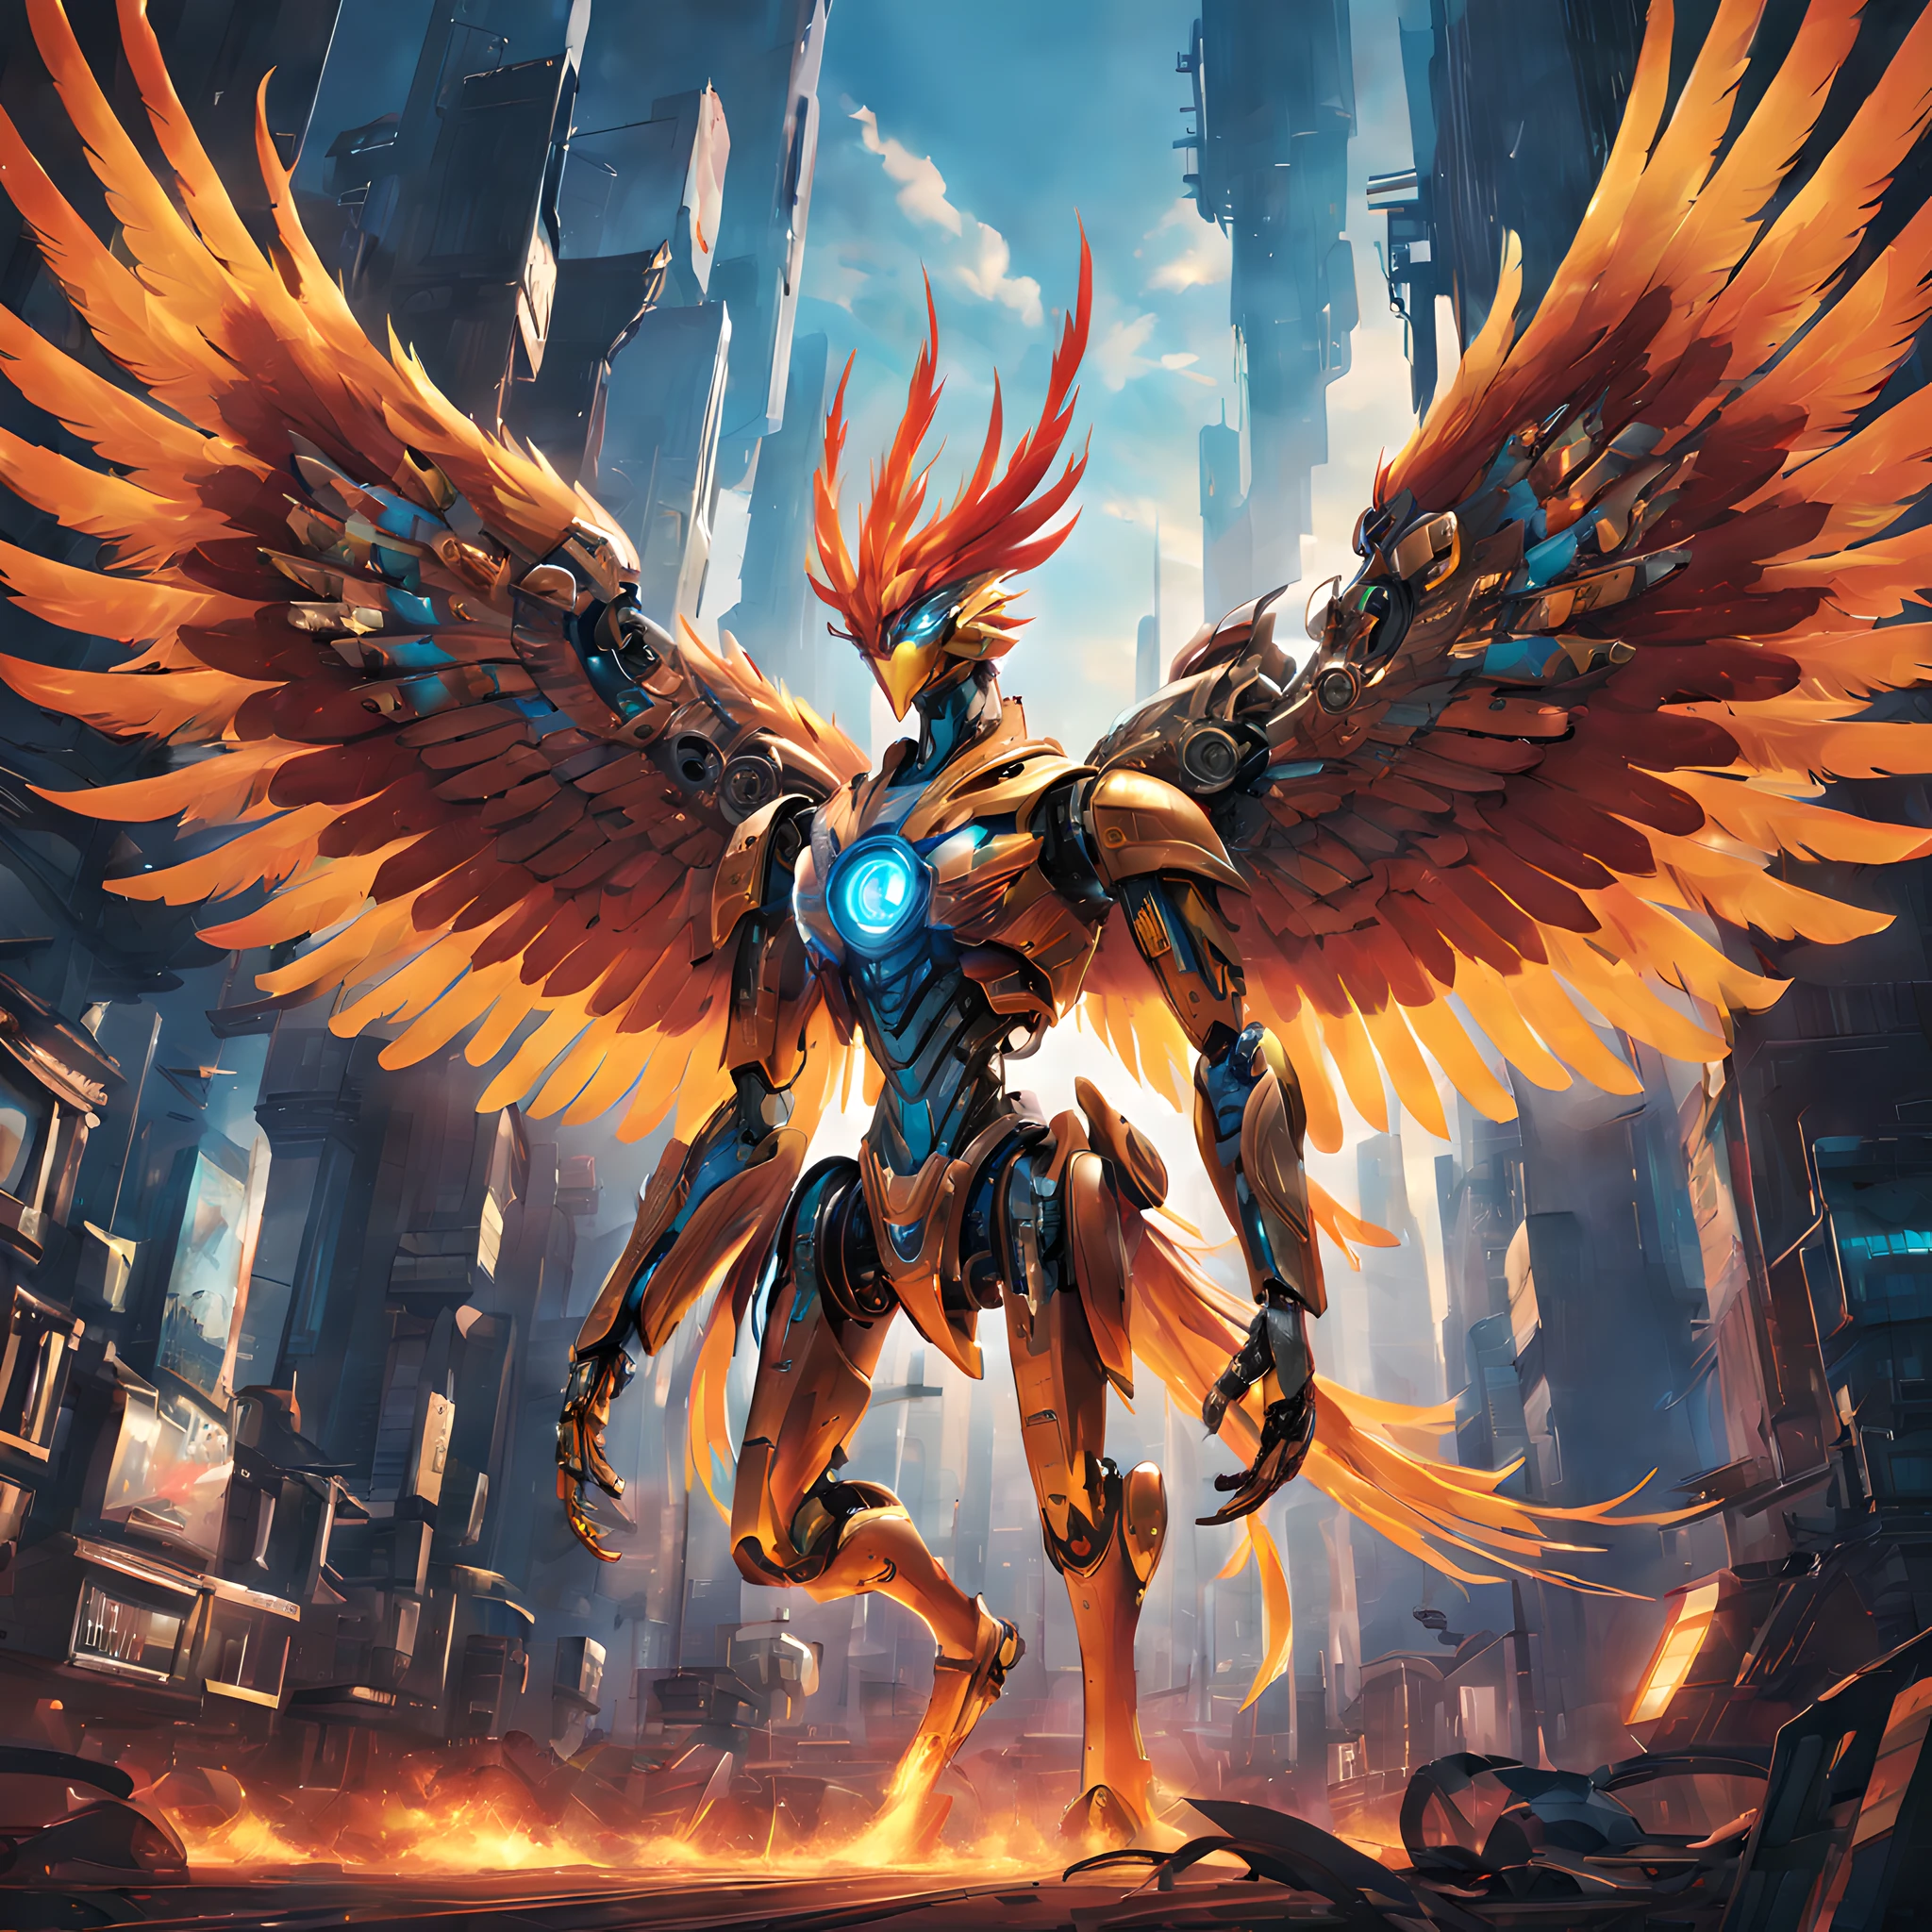 Composition: Begin with a striking composition that captures the essence of a phoenix reborn in the age of machinery. The layout should exude dynamism and strength, echoing the iconic imagery of cyborgs and mecha.

Phoenix: The central focus is the resplendent cyborg phoenix, its metallic feathers glistening with vibrant colors that evoke life and technology. Capture intricate details like the fusion of organic and mechanical elements, with Danbooru tags like "cyborg," "robotic," and "mechanical_feathers" to guide the imagery.

Background: The backdrop should depict a world transformed by technology, featuring a colossal, soaring robotic construct that dwarfs even the largest skyscrapers. The sky should be ablaze with energy, hinting at the grandeur of the robotic phoenix's flight.

Style: This artwork should seamlessly blend digital anime illustration with 3D CGI, resulting in a vivid and immersive experience. Employ advanced rendering techniques to ensure a high-resolution image, showcasing every nuance of the cybernetic phoenix's design and the futuristic world it inhabits.